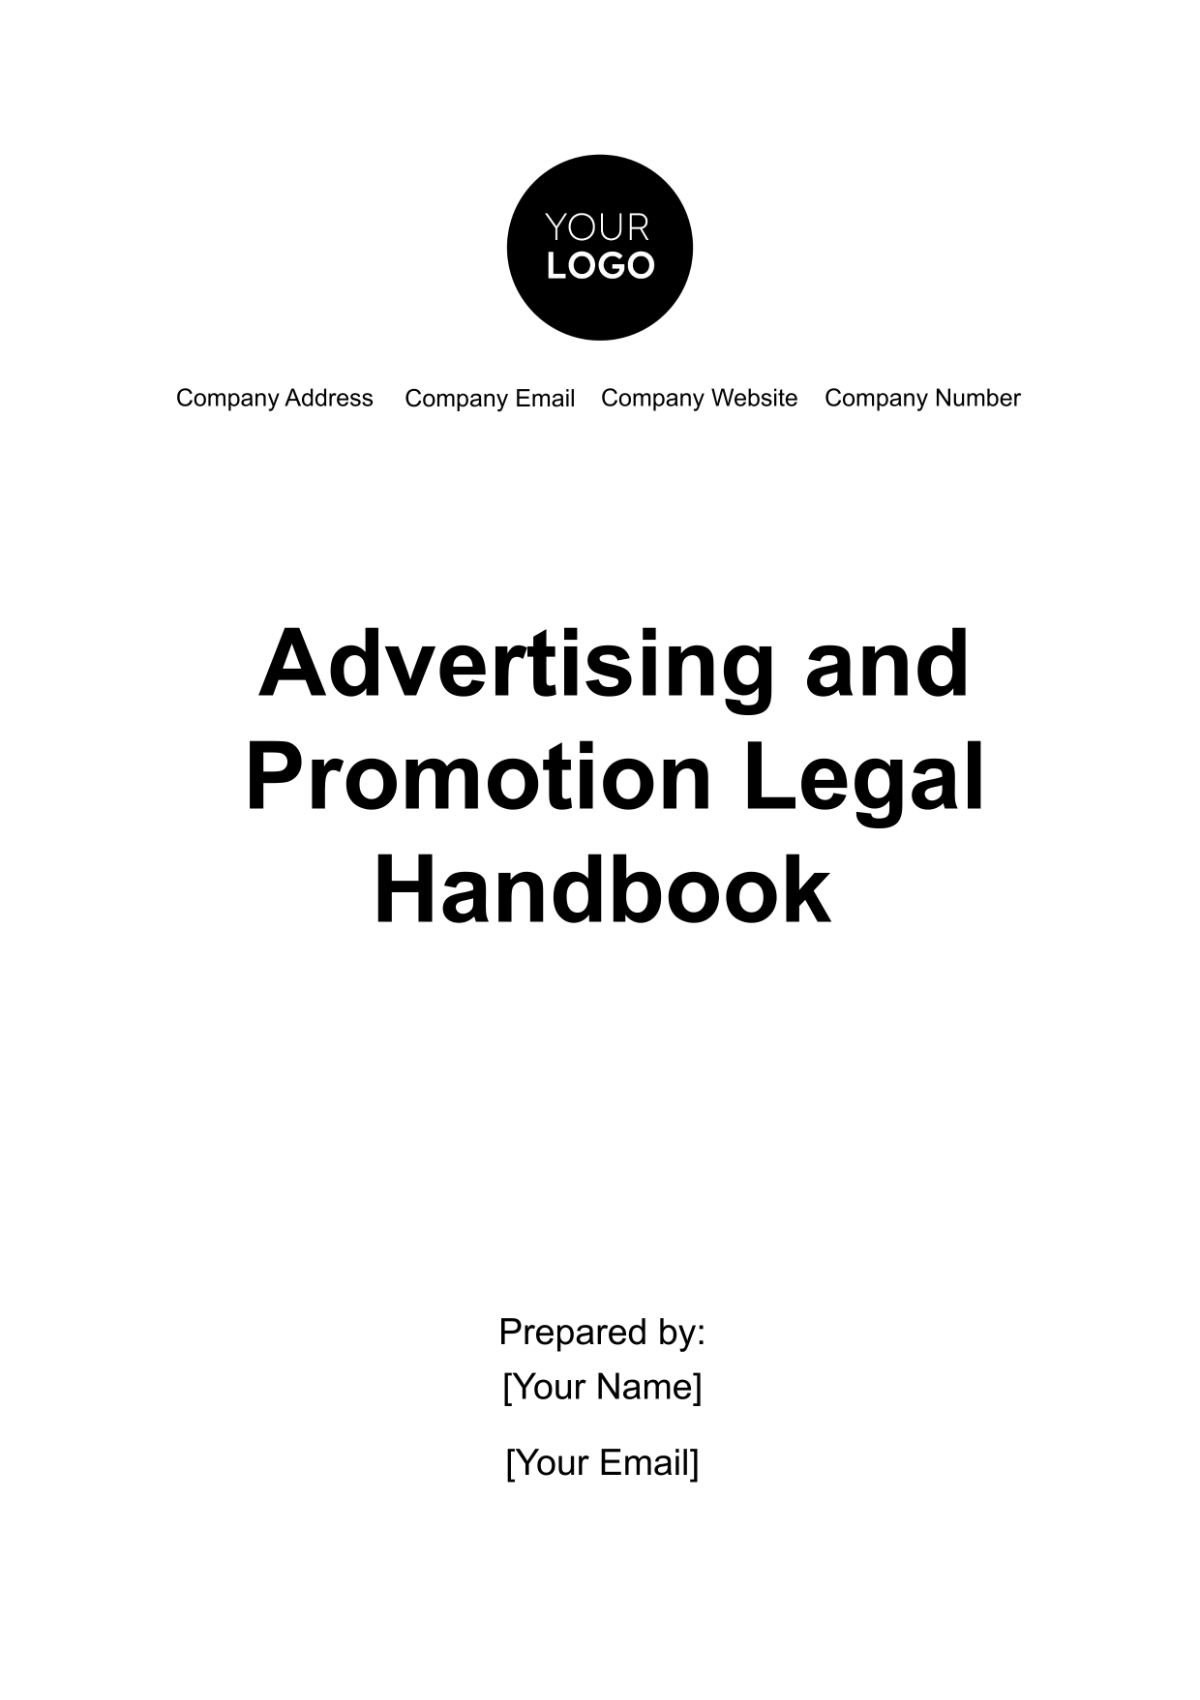 Free Advertising and Promotion Legal Handbook Template